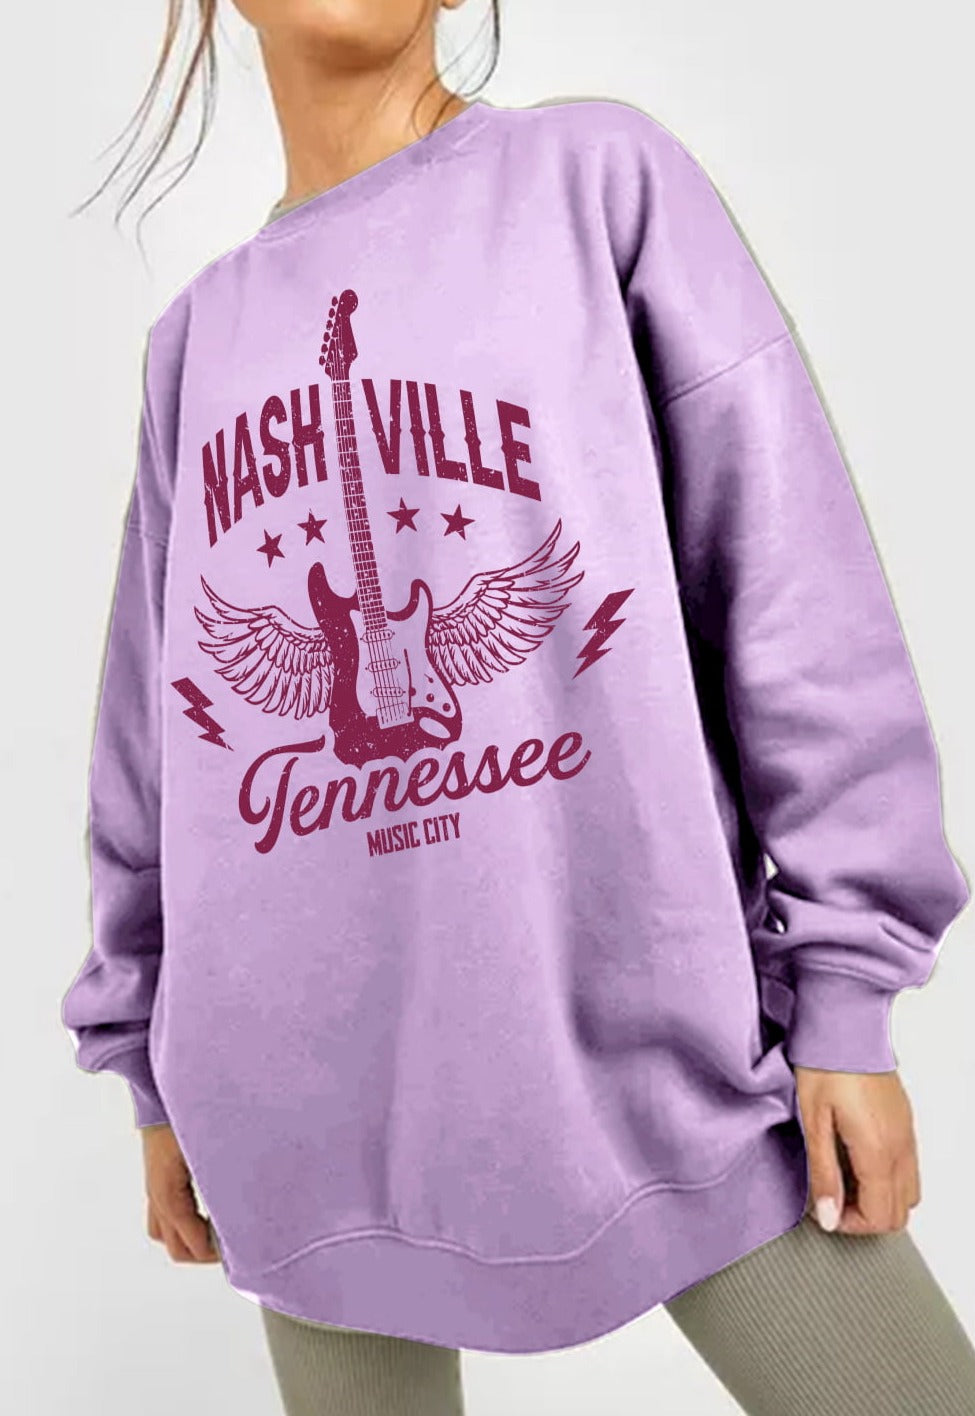 Simply Love Full Size NASHVILLE TENNESSEE MUSIC CITY Graphic Sweatshirt - Cheeky Chic Boutique